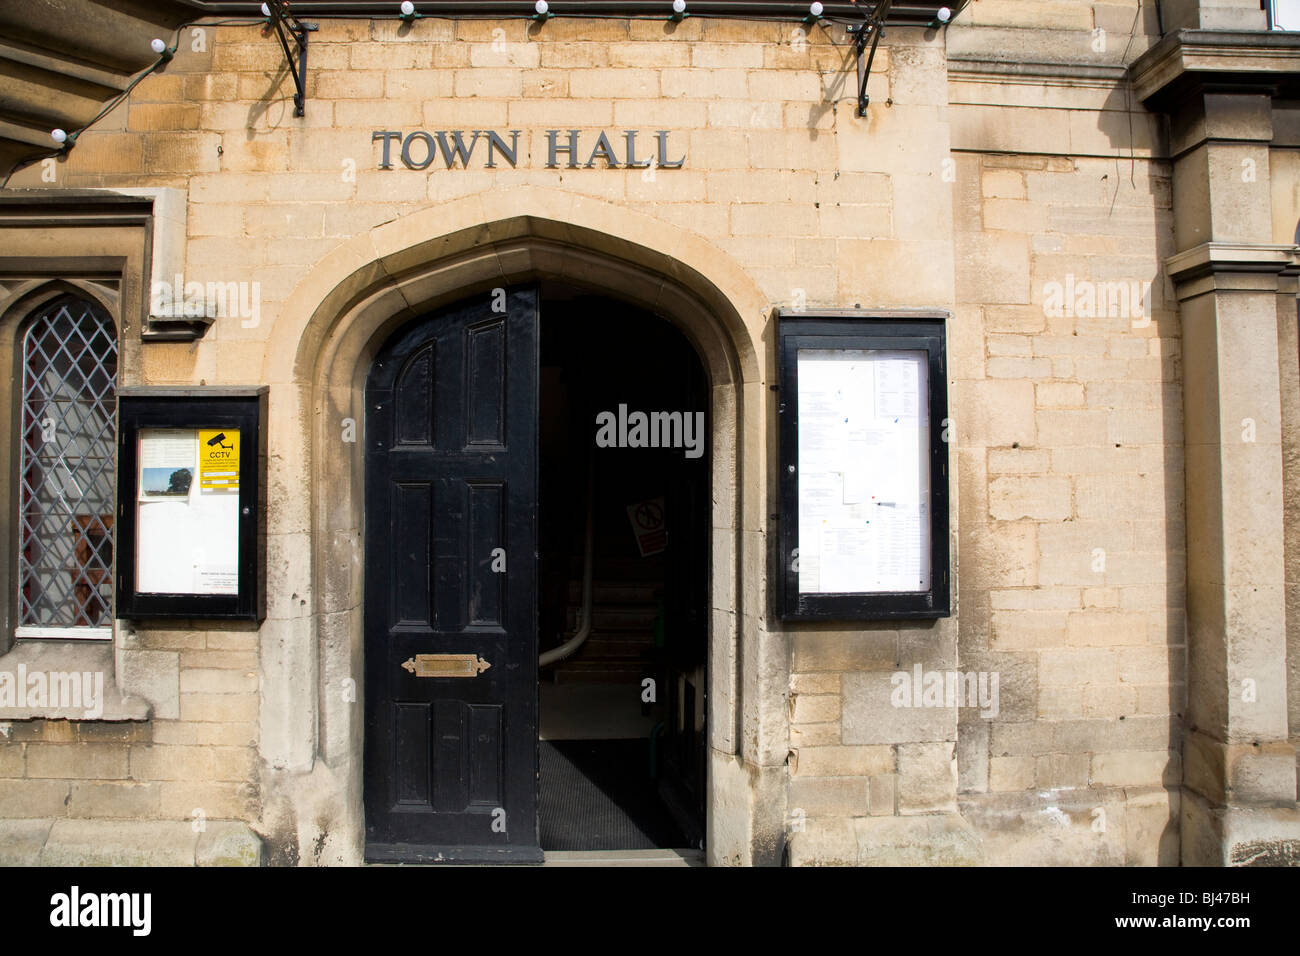 Town Hall in Market Deeping, Lincs Stock Photo